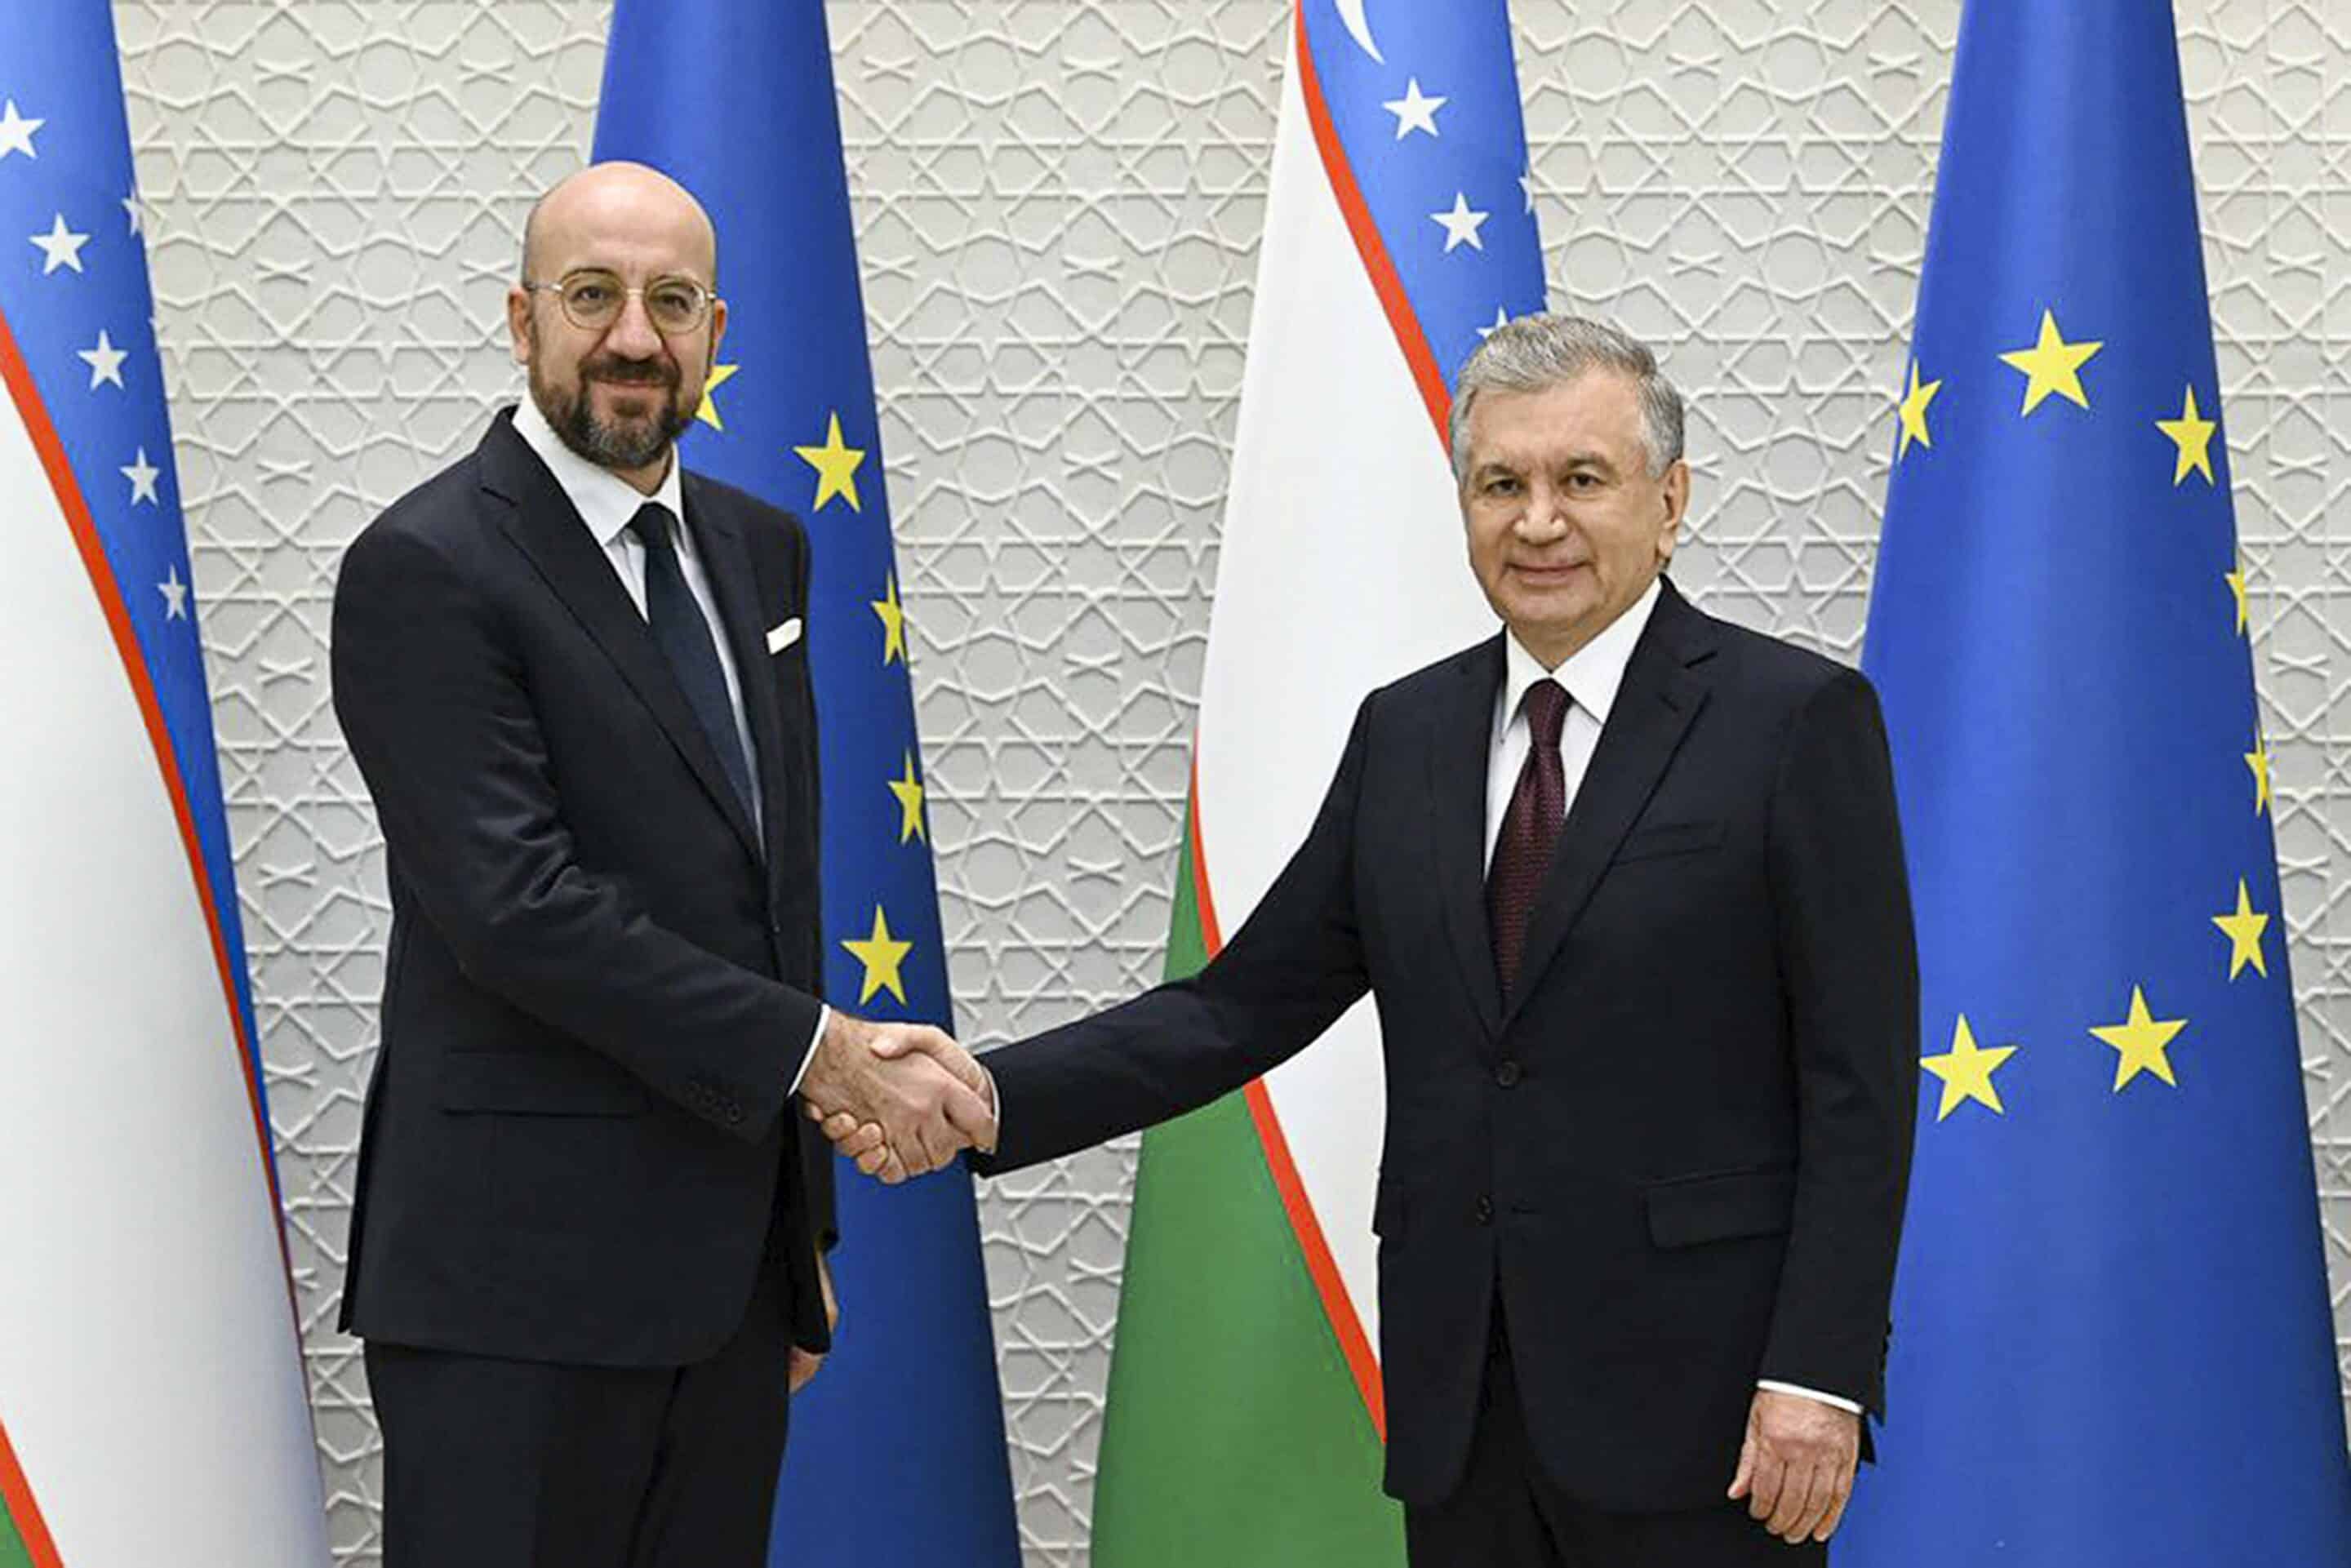 In this photo released by the Uzbekistan Presidential Press Service, Uzbek President Shavkat Mirziyoyev, right, and European Council President Charles Michel pose for a photo prior to their talks in Tashkent, Uzbekistan, Friday, Oct. 28, 2022. (Uzbekistan Presidential Press Service via AP)/XAZ104/22301314385713/AP PROVIDES ACCESS TO THIS PUBLICLY DISTRIBUTED HANDOUT PHOTO PROVIDED BY THE UZBEKISTAN PRESIDENTIAL PRESS OFFICE ; MANDATORY CREDIT./2210281051